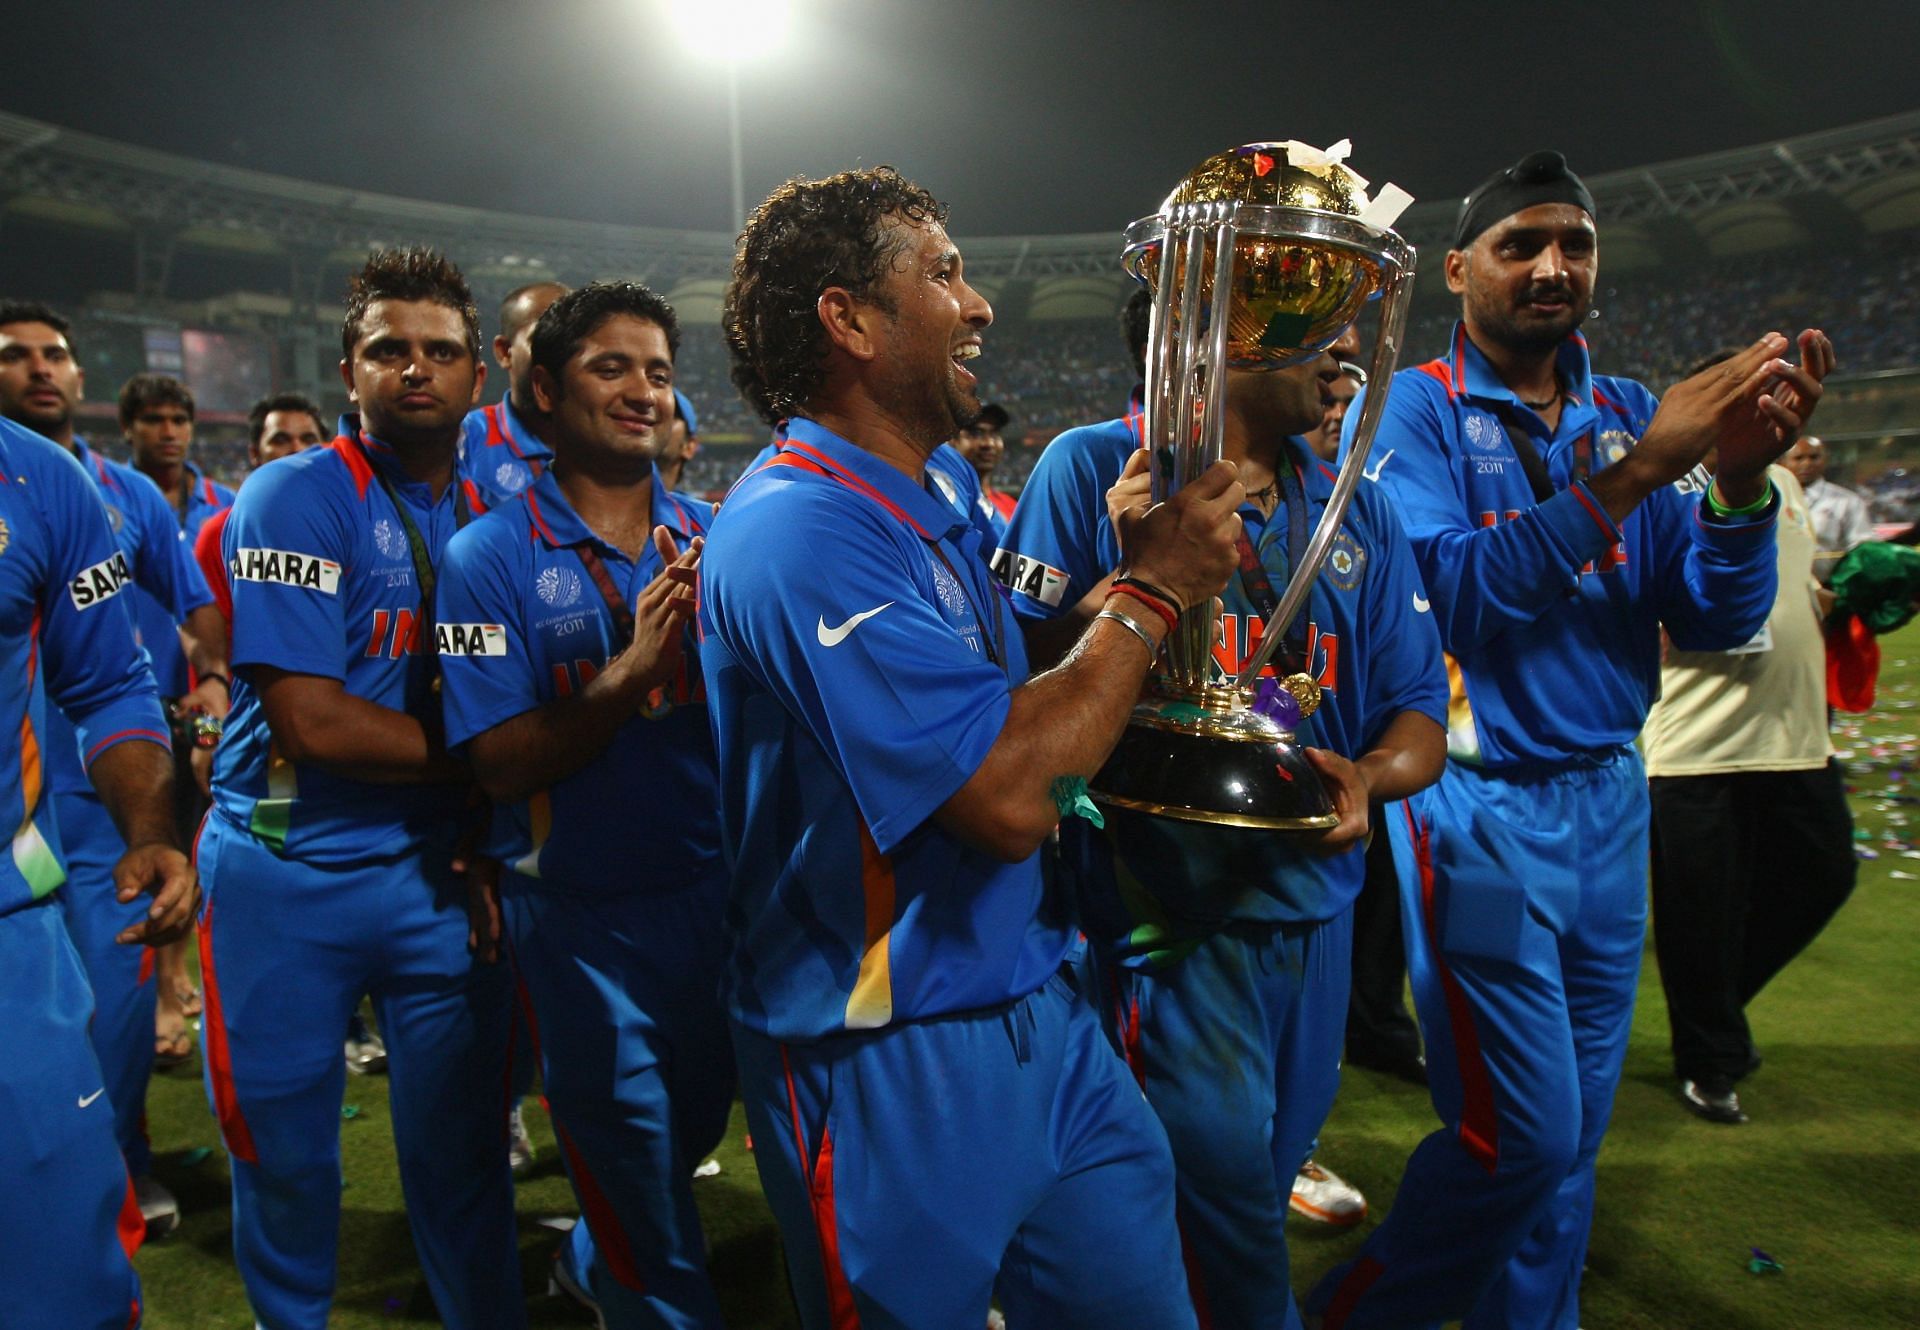 The Men in Blue celebrate after winning the 2011 World Cup. (Pic: Getty Images)